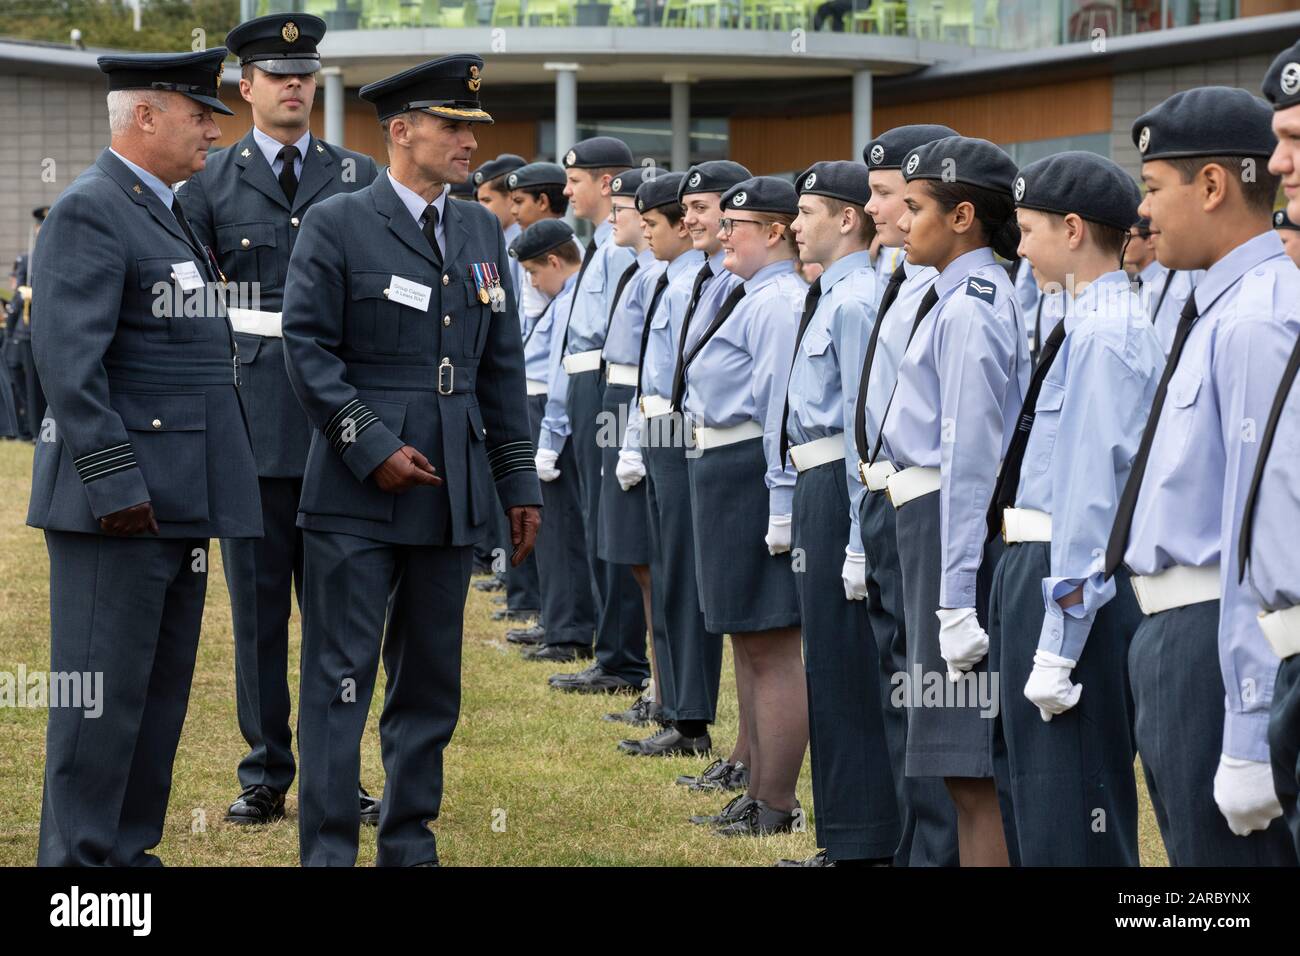 Annual Battle of Britain Memorial Day parade and service, attended by ...